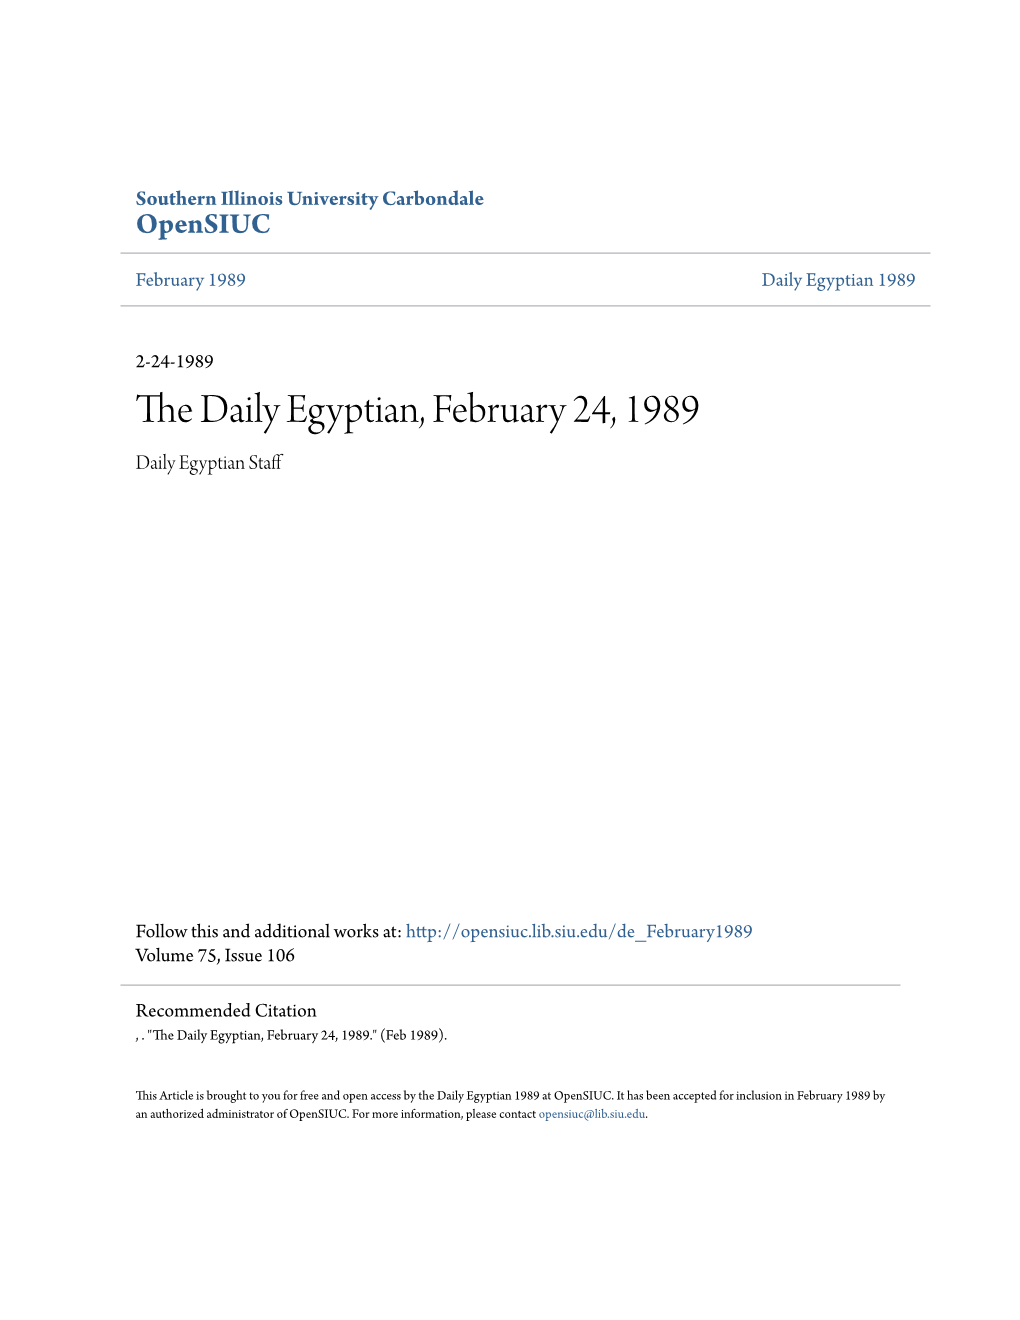 The Daily Egyptian, February 24, 1989